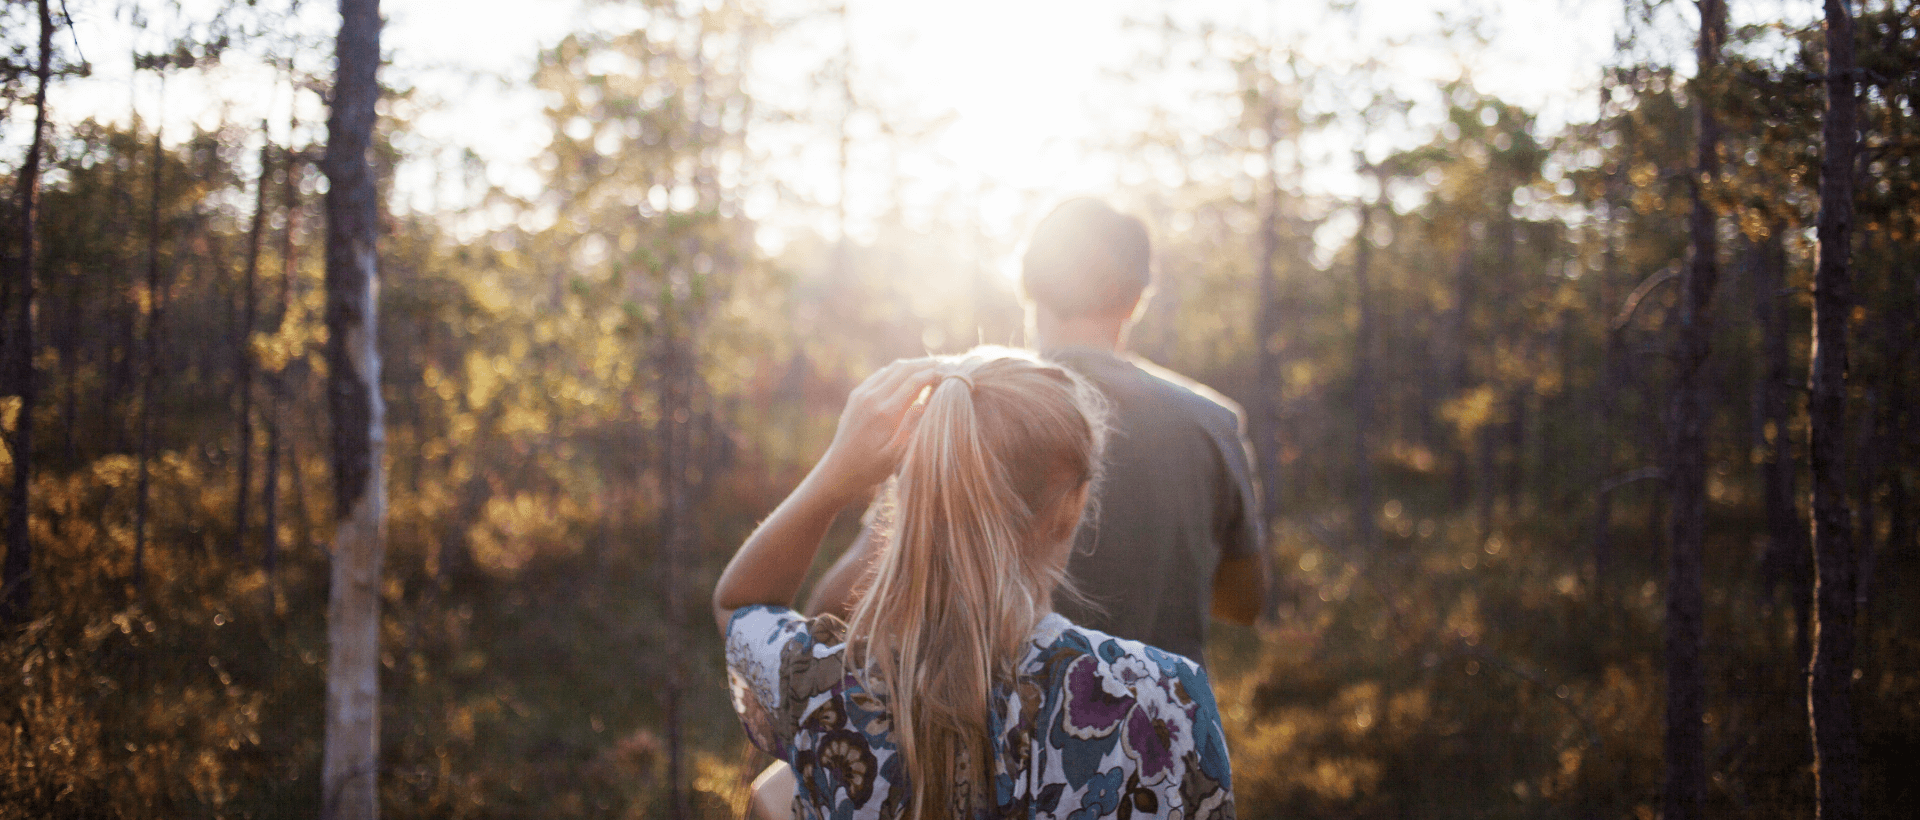 A young woman following a young man into the forest, summery atmosphere and sunshine, rear view